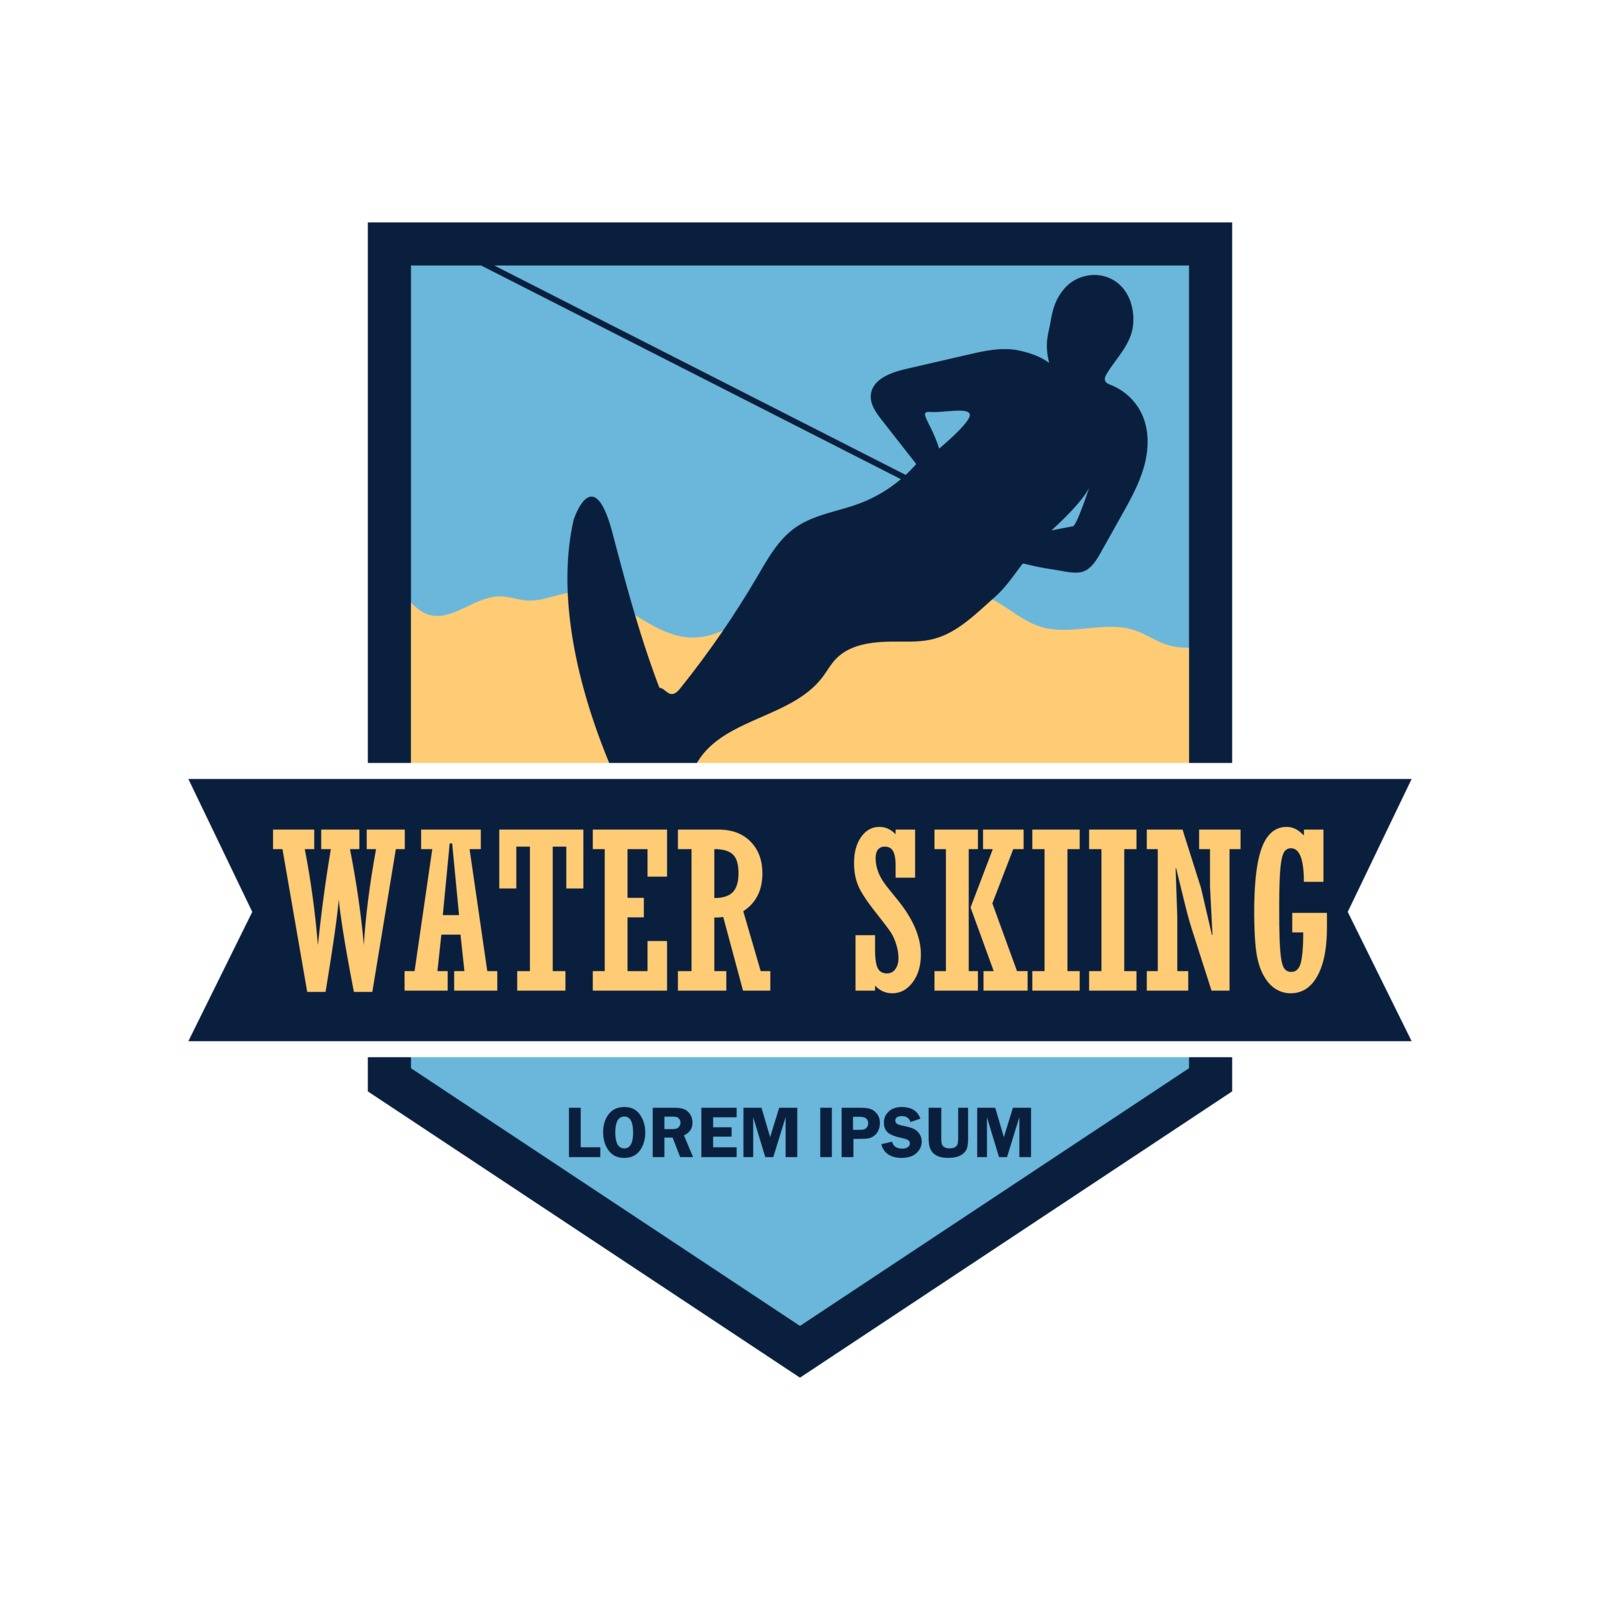 water skiing logo with text space for your slogan / tag line, vector illustration by SevenCircles